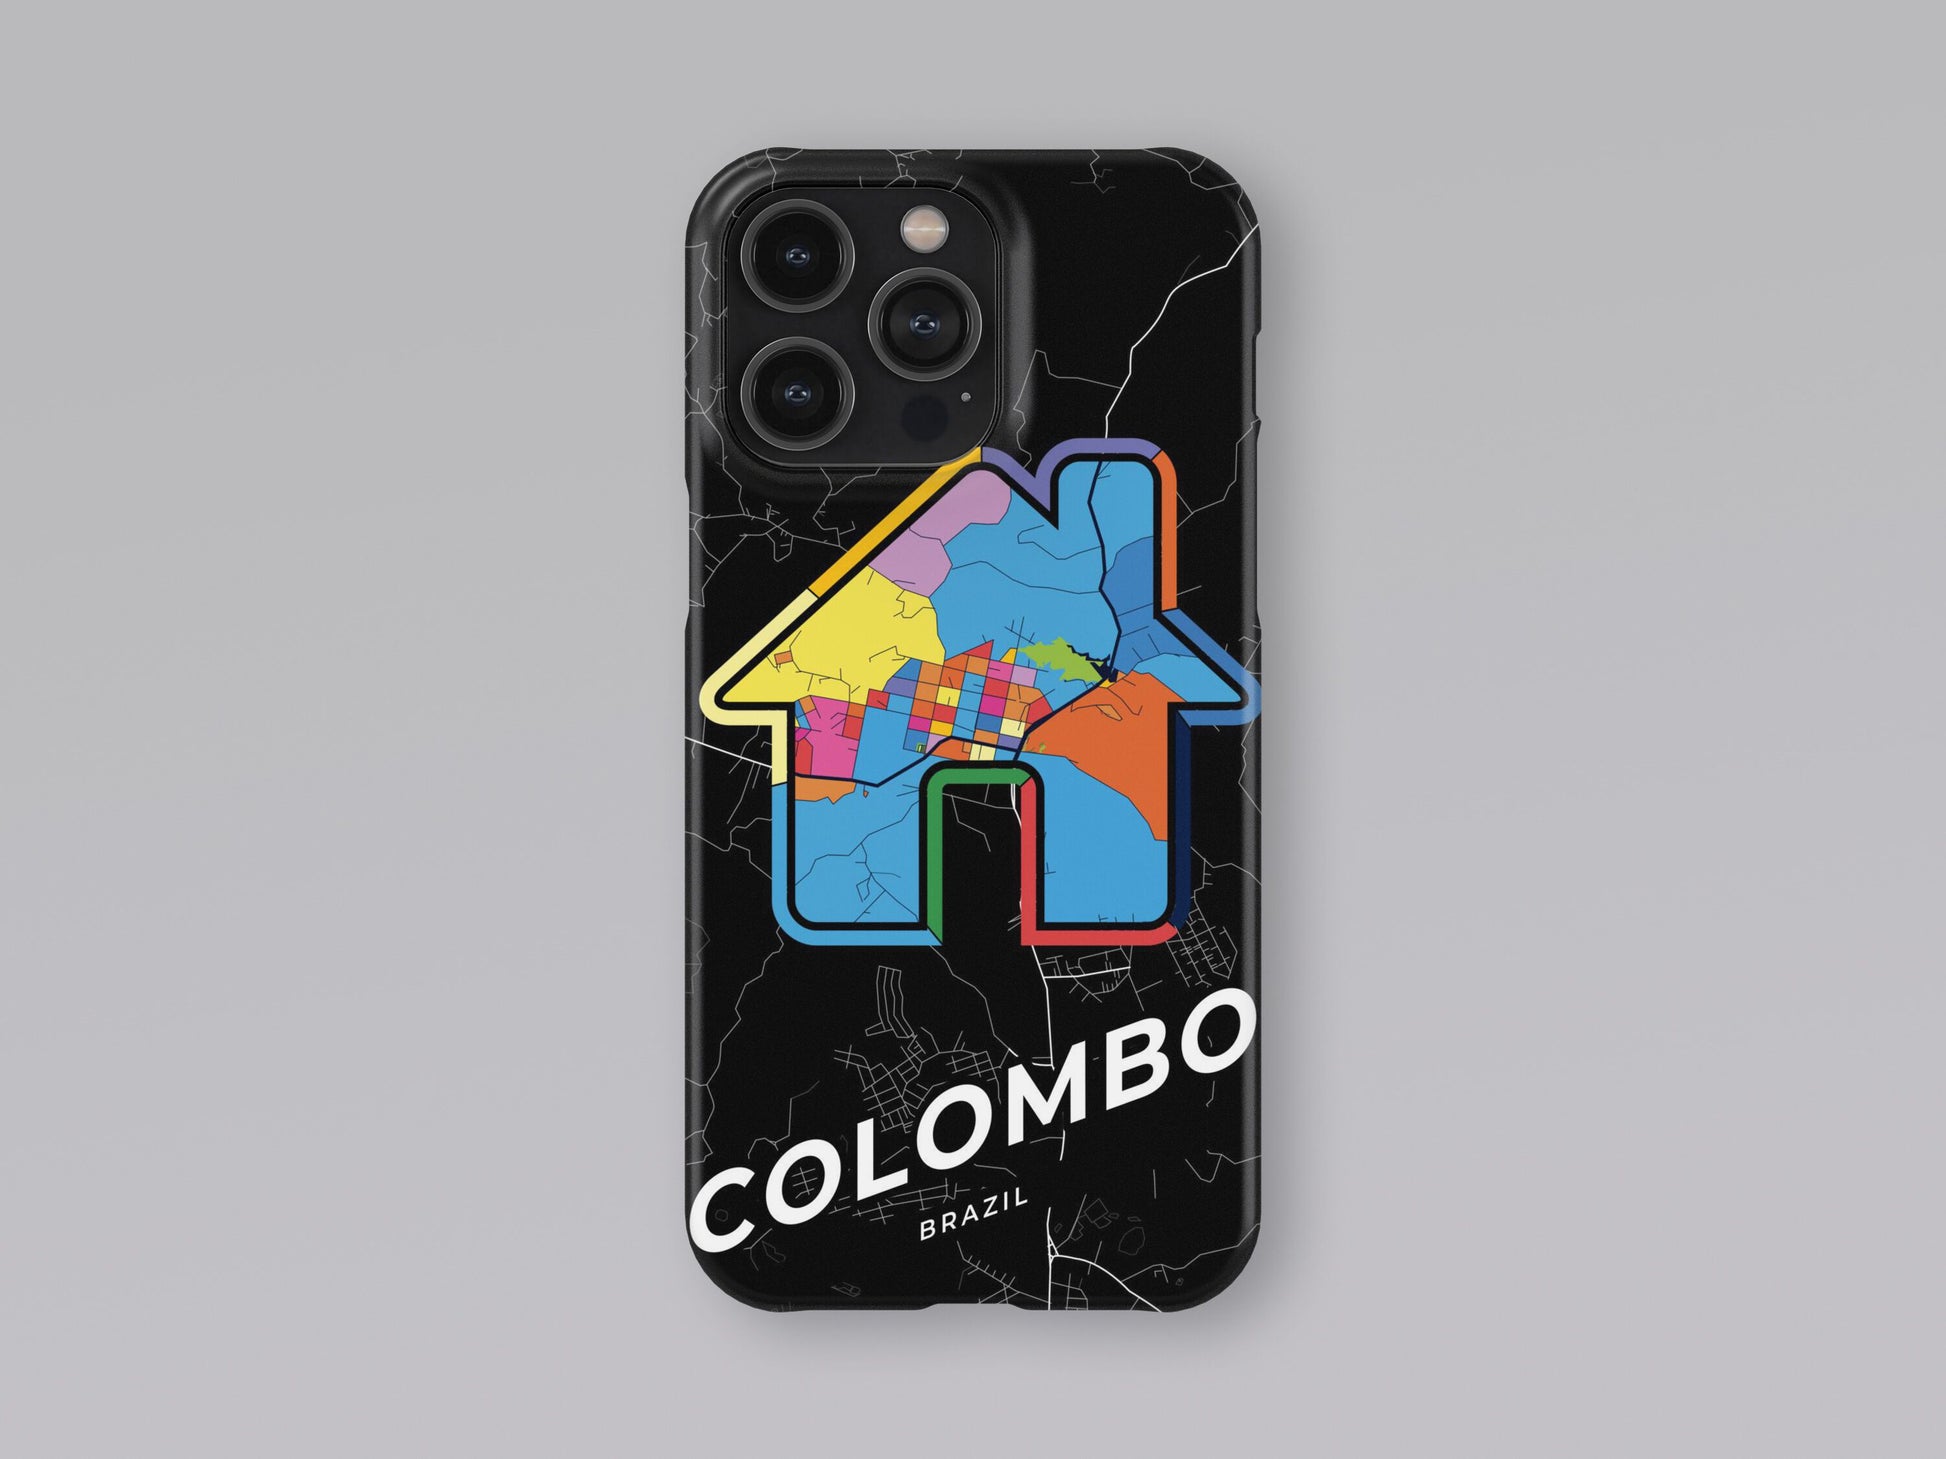 Colombo Brazil slim phone case with colorful icon. Birthday, wedding or housewarming gift. Couple match cases. 3